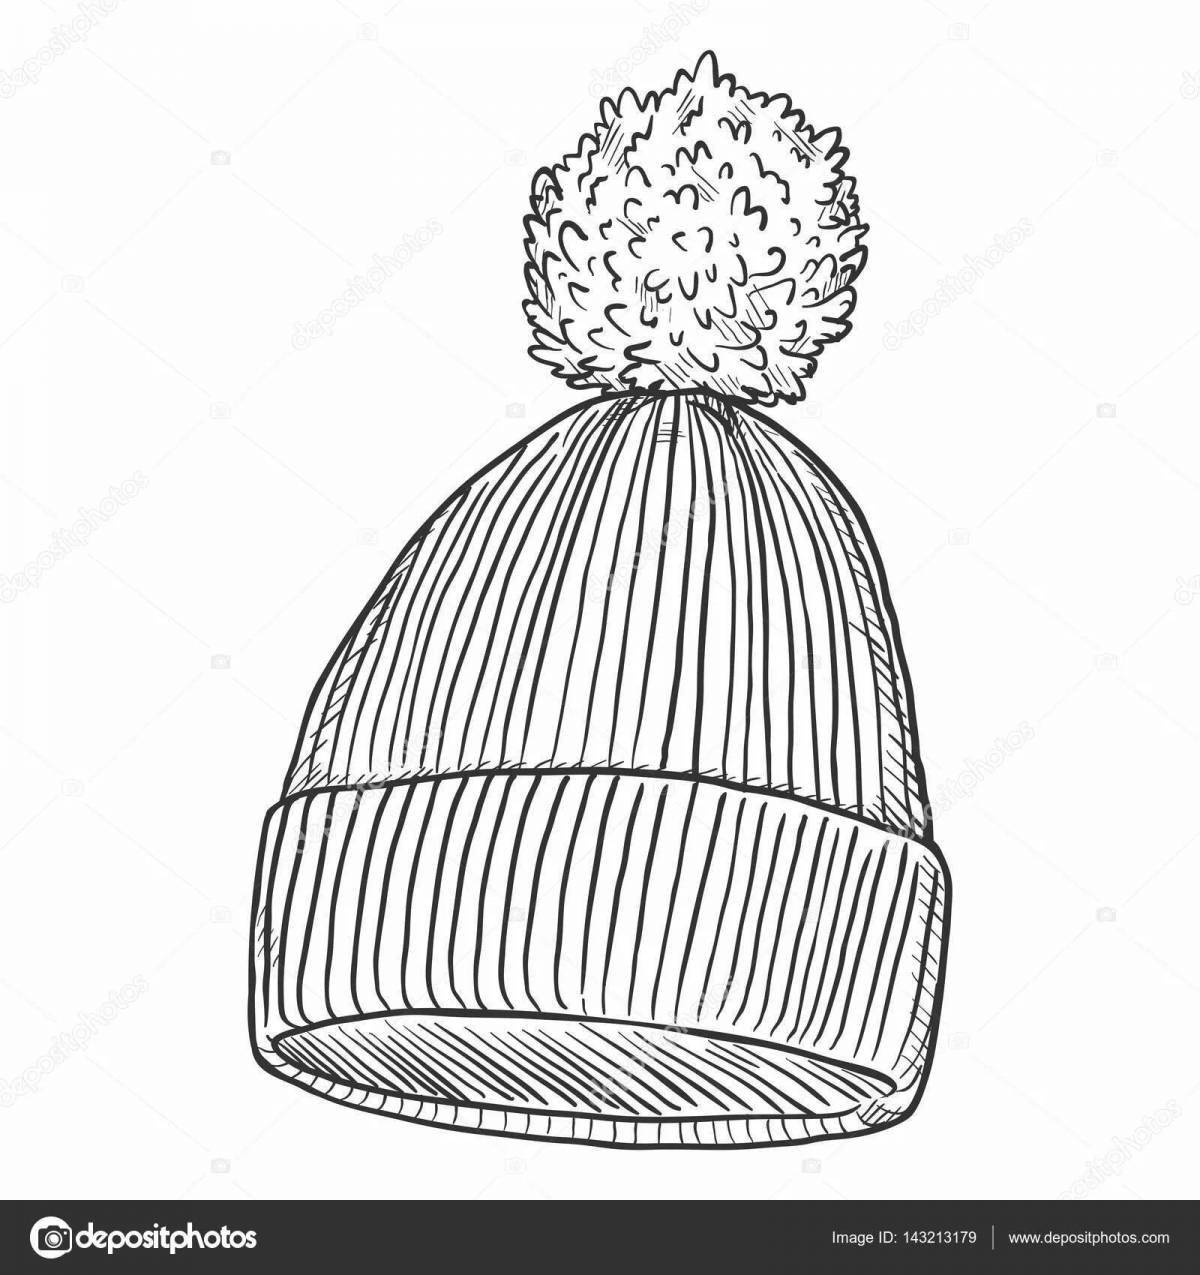 Exciting pom-pom hat for kids